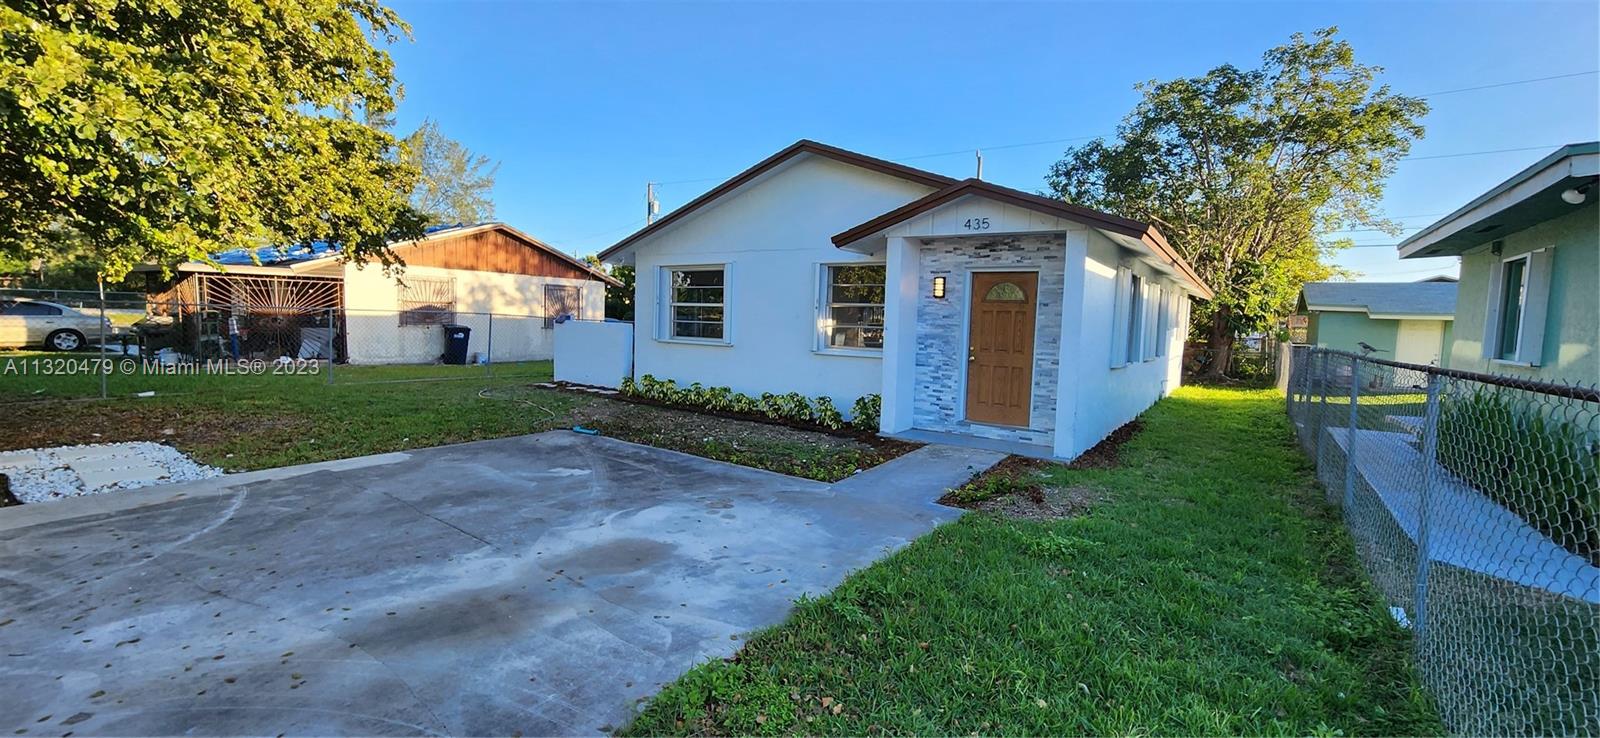 435 NW 15th St  For Sale A11320479, FL